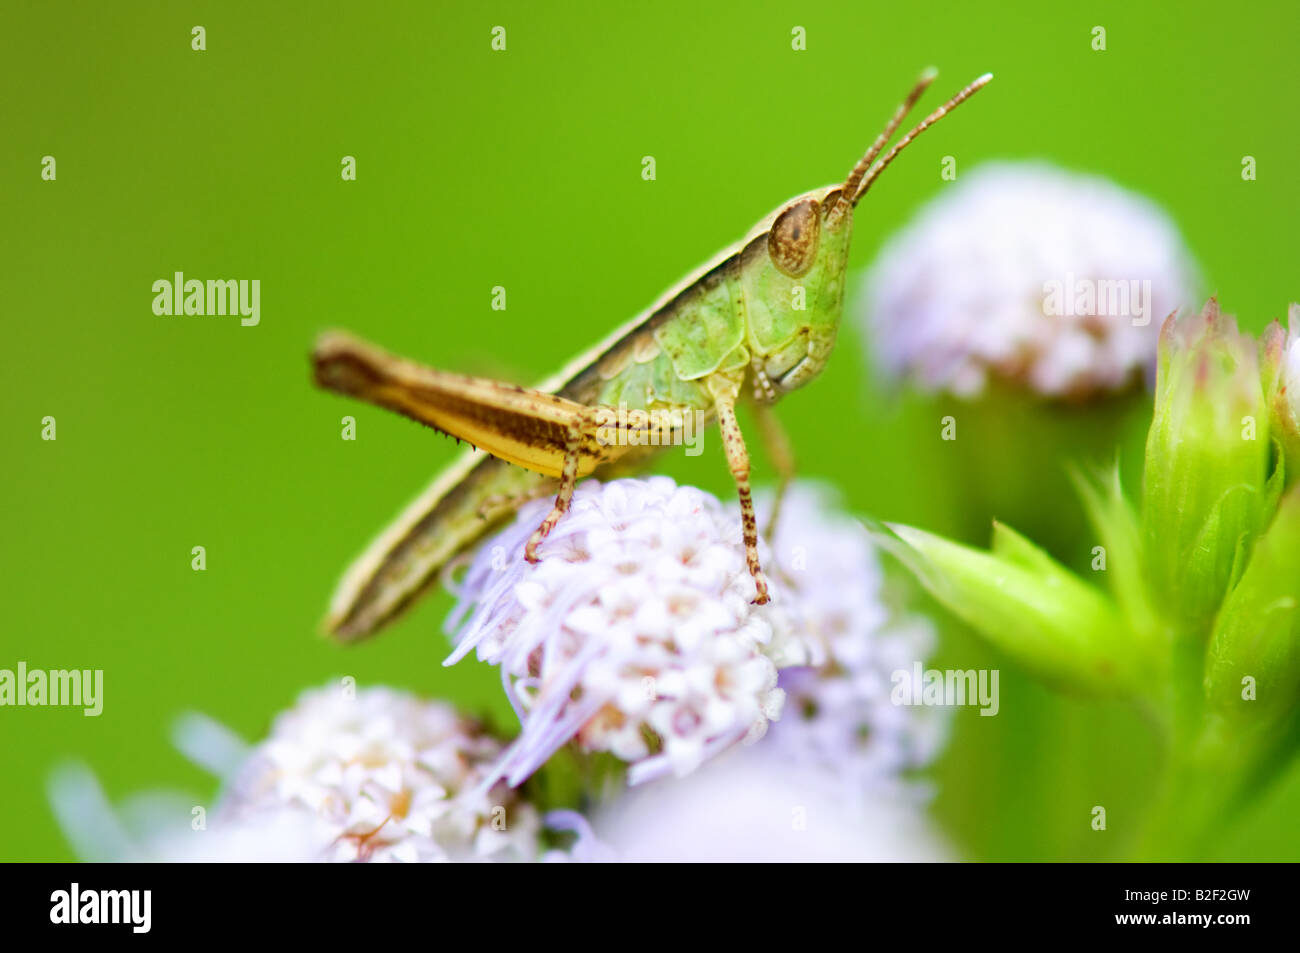 The side view of grasshopper on eupatorium flowers Stock Photo